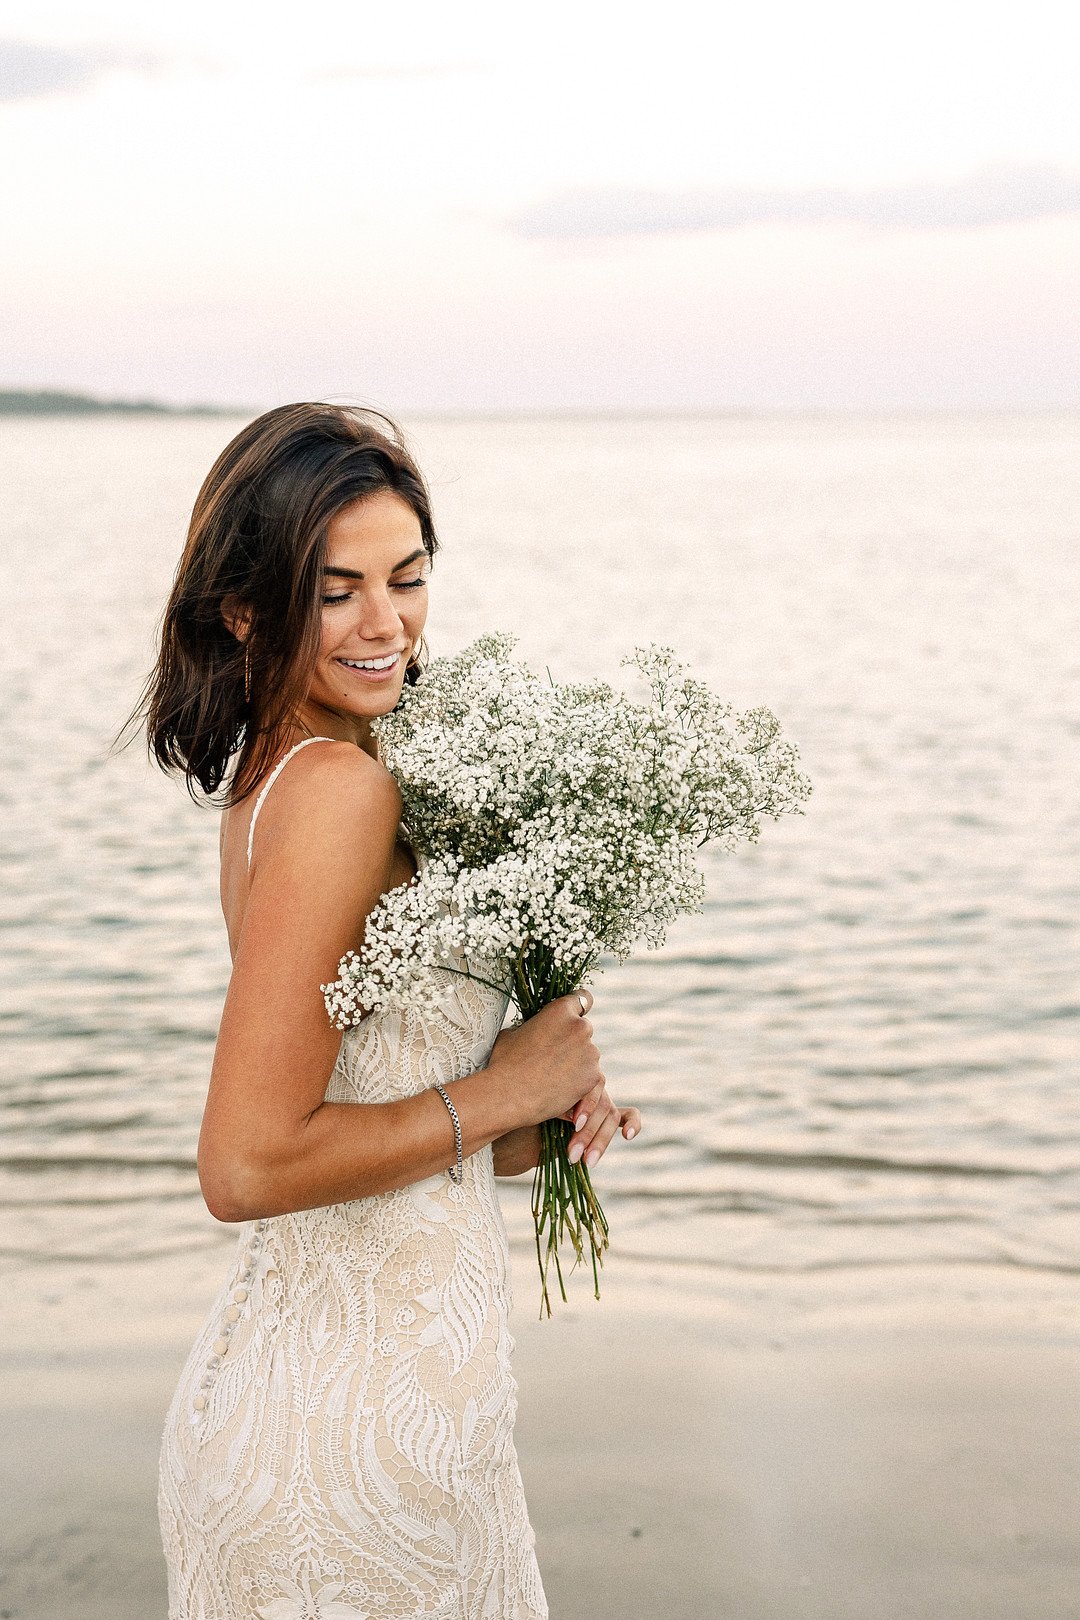 A beachy bridal moment_Carly Terry Photography_AW BRIDAL-1584_low.jpg